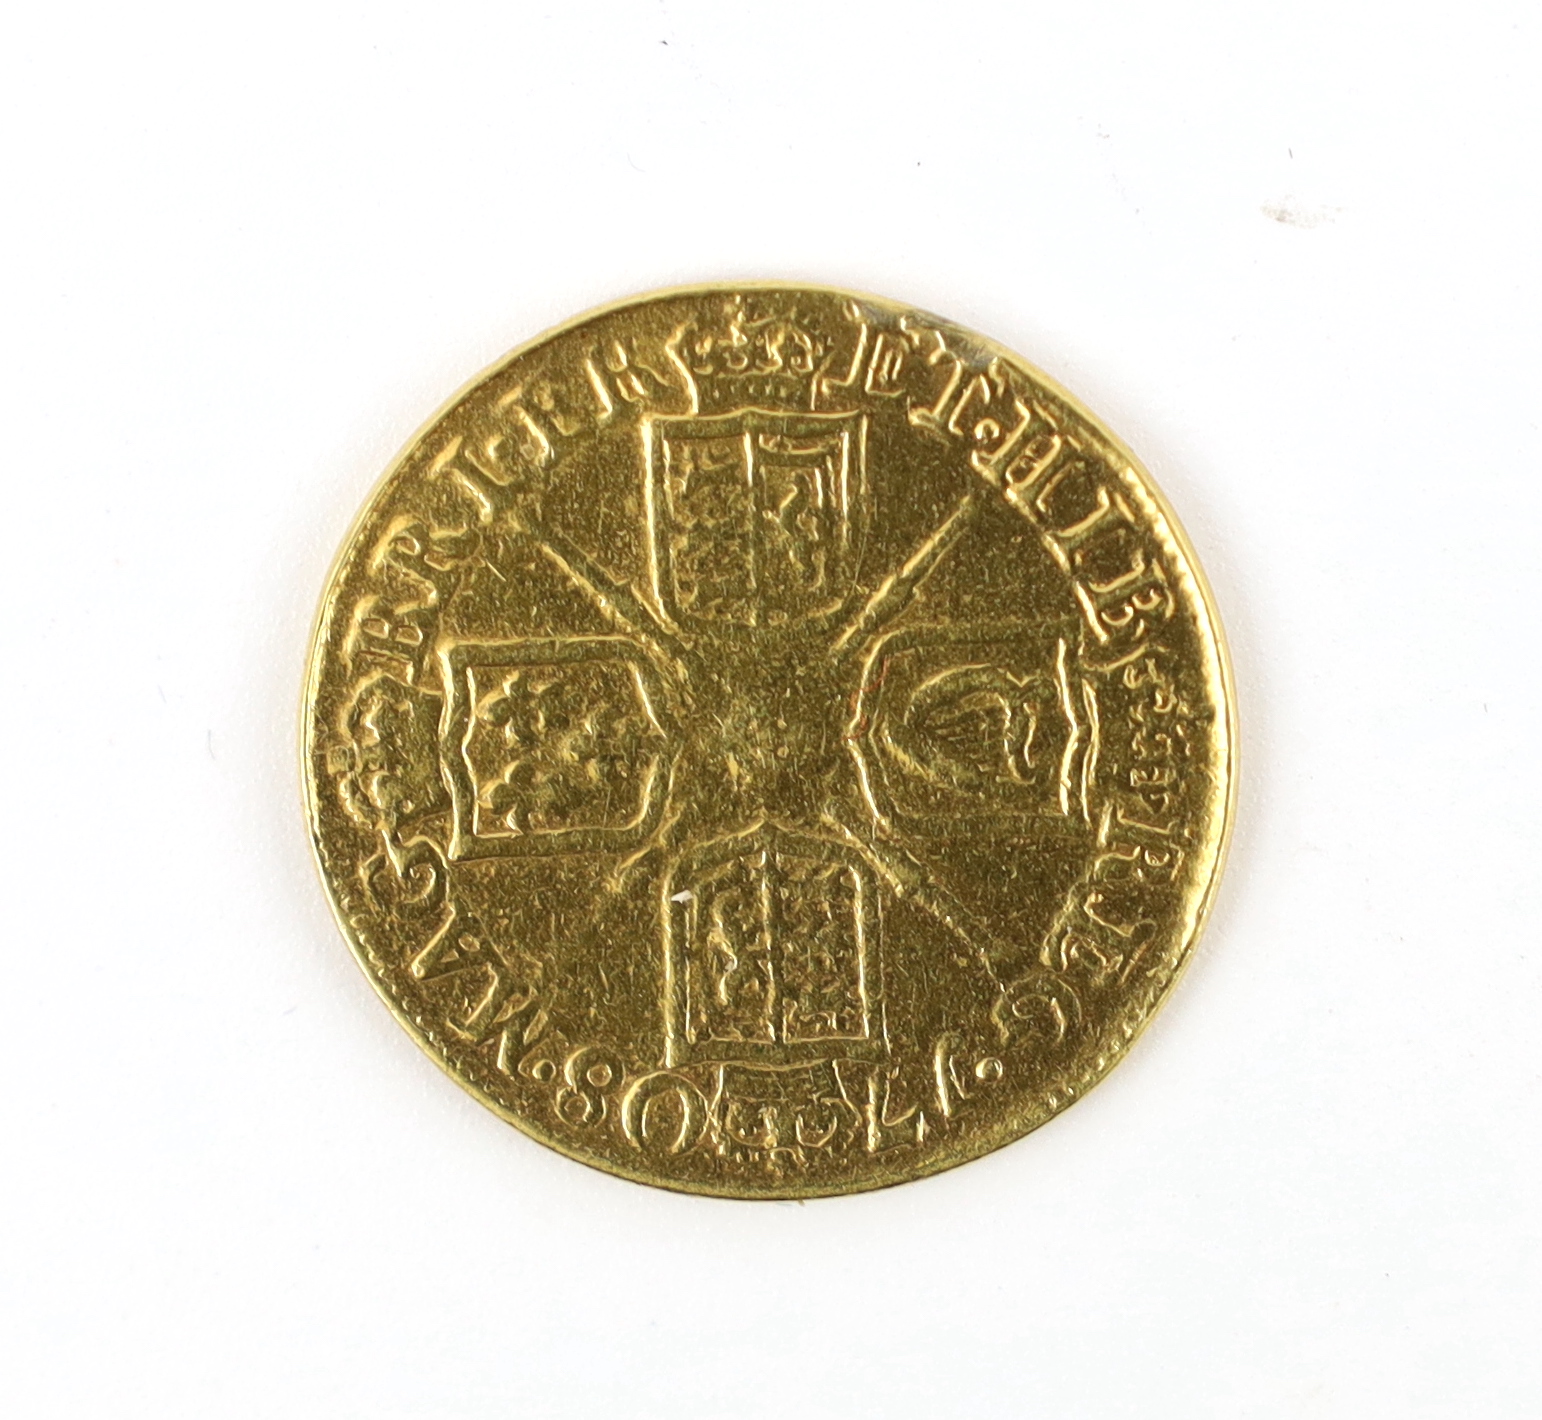 British Gold coins, Anne guinea, 1708, second bust, plugged, otherwise VG or better (S3572)